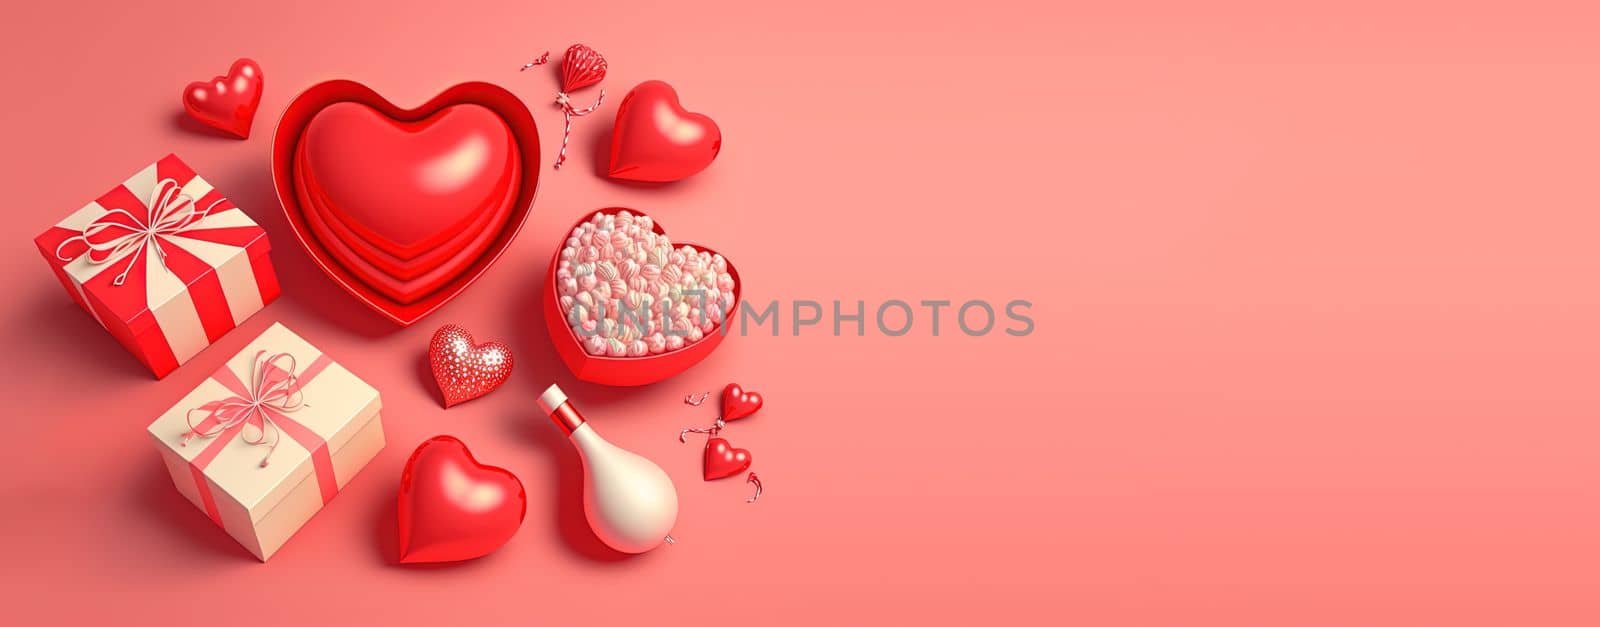 Happy Valentine's Day banner featuring a glossy red heart shape by templator